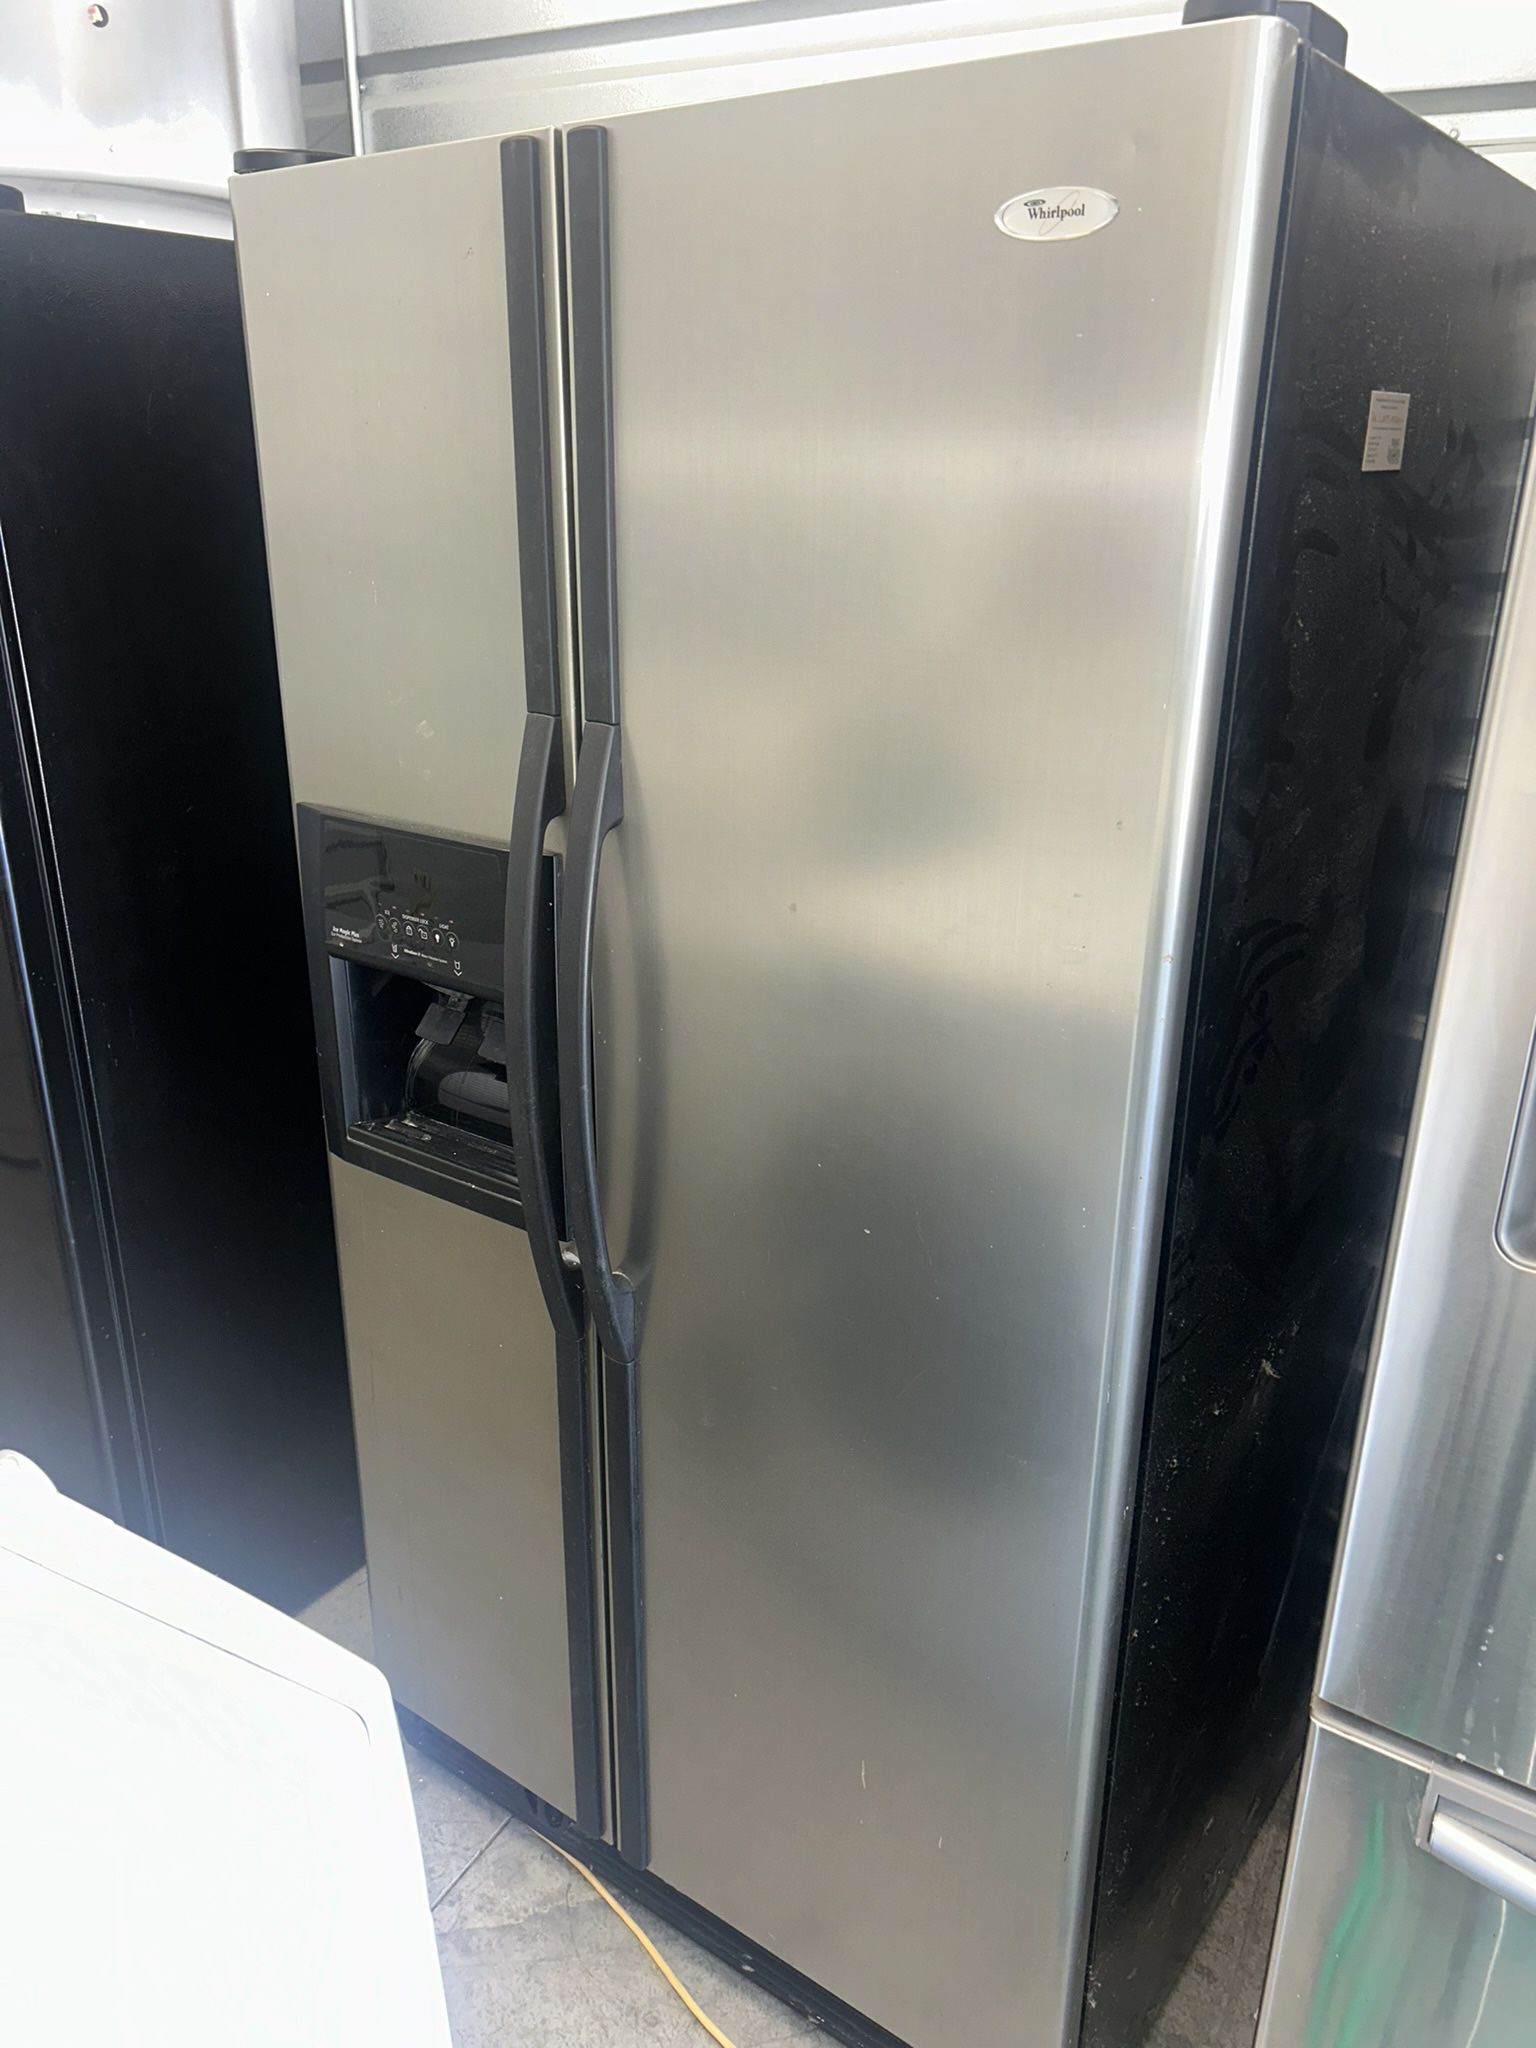 ⭐️NICE WHIRLPOOL STAINLESS STEEL SIDE BY REFRIGERATOR⭐️